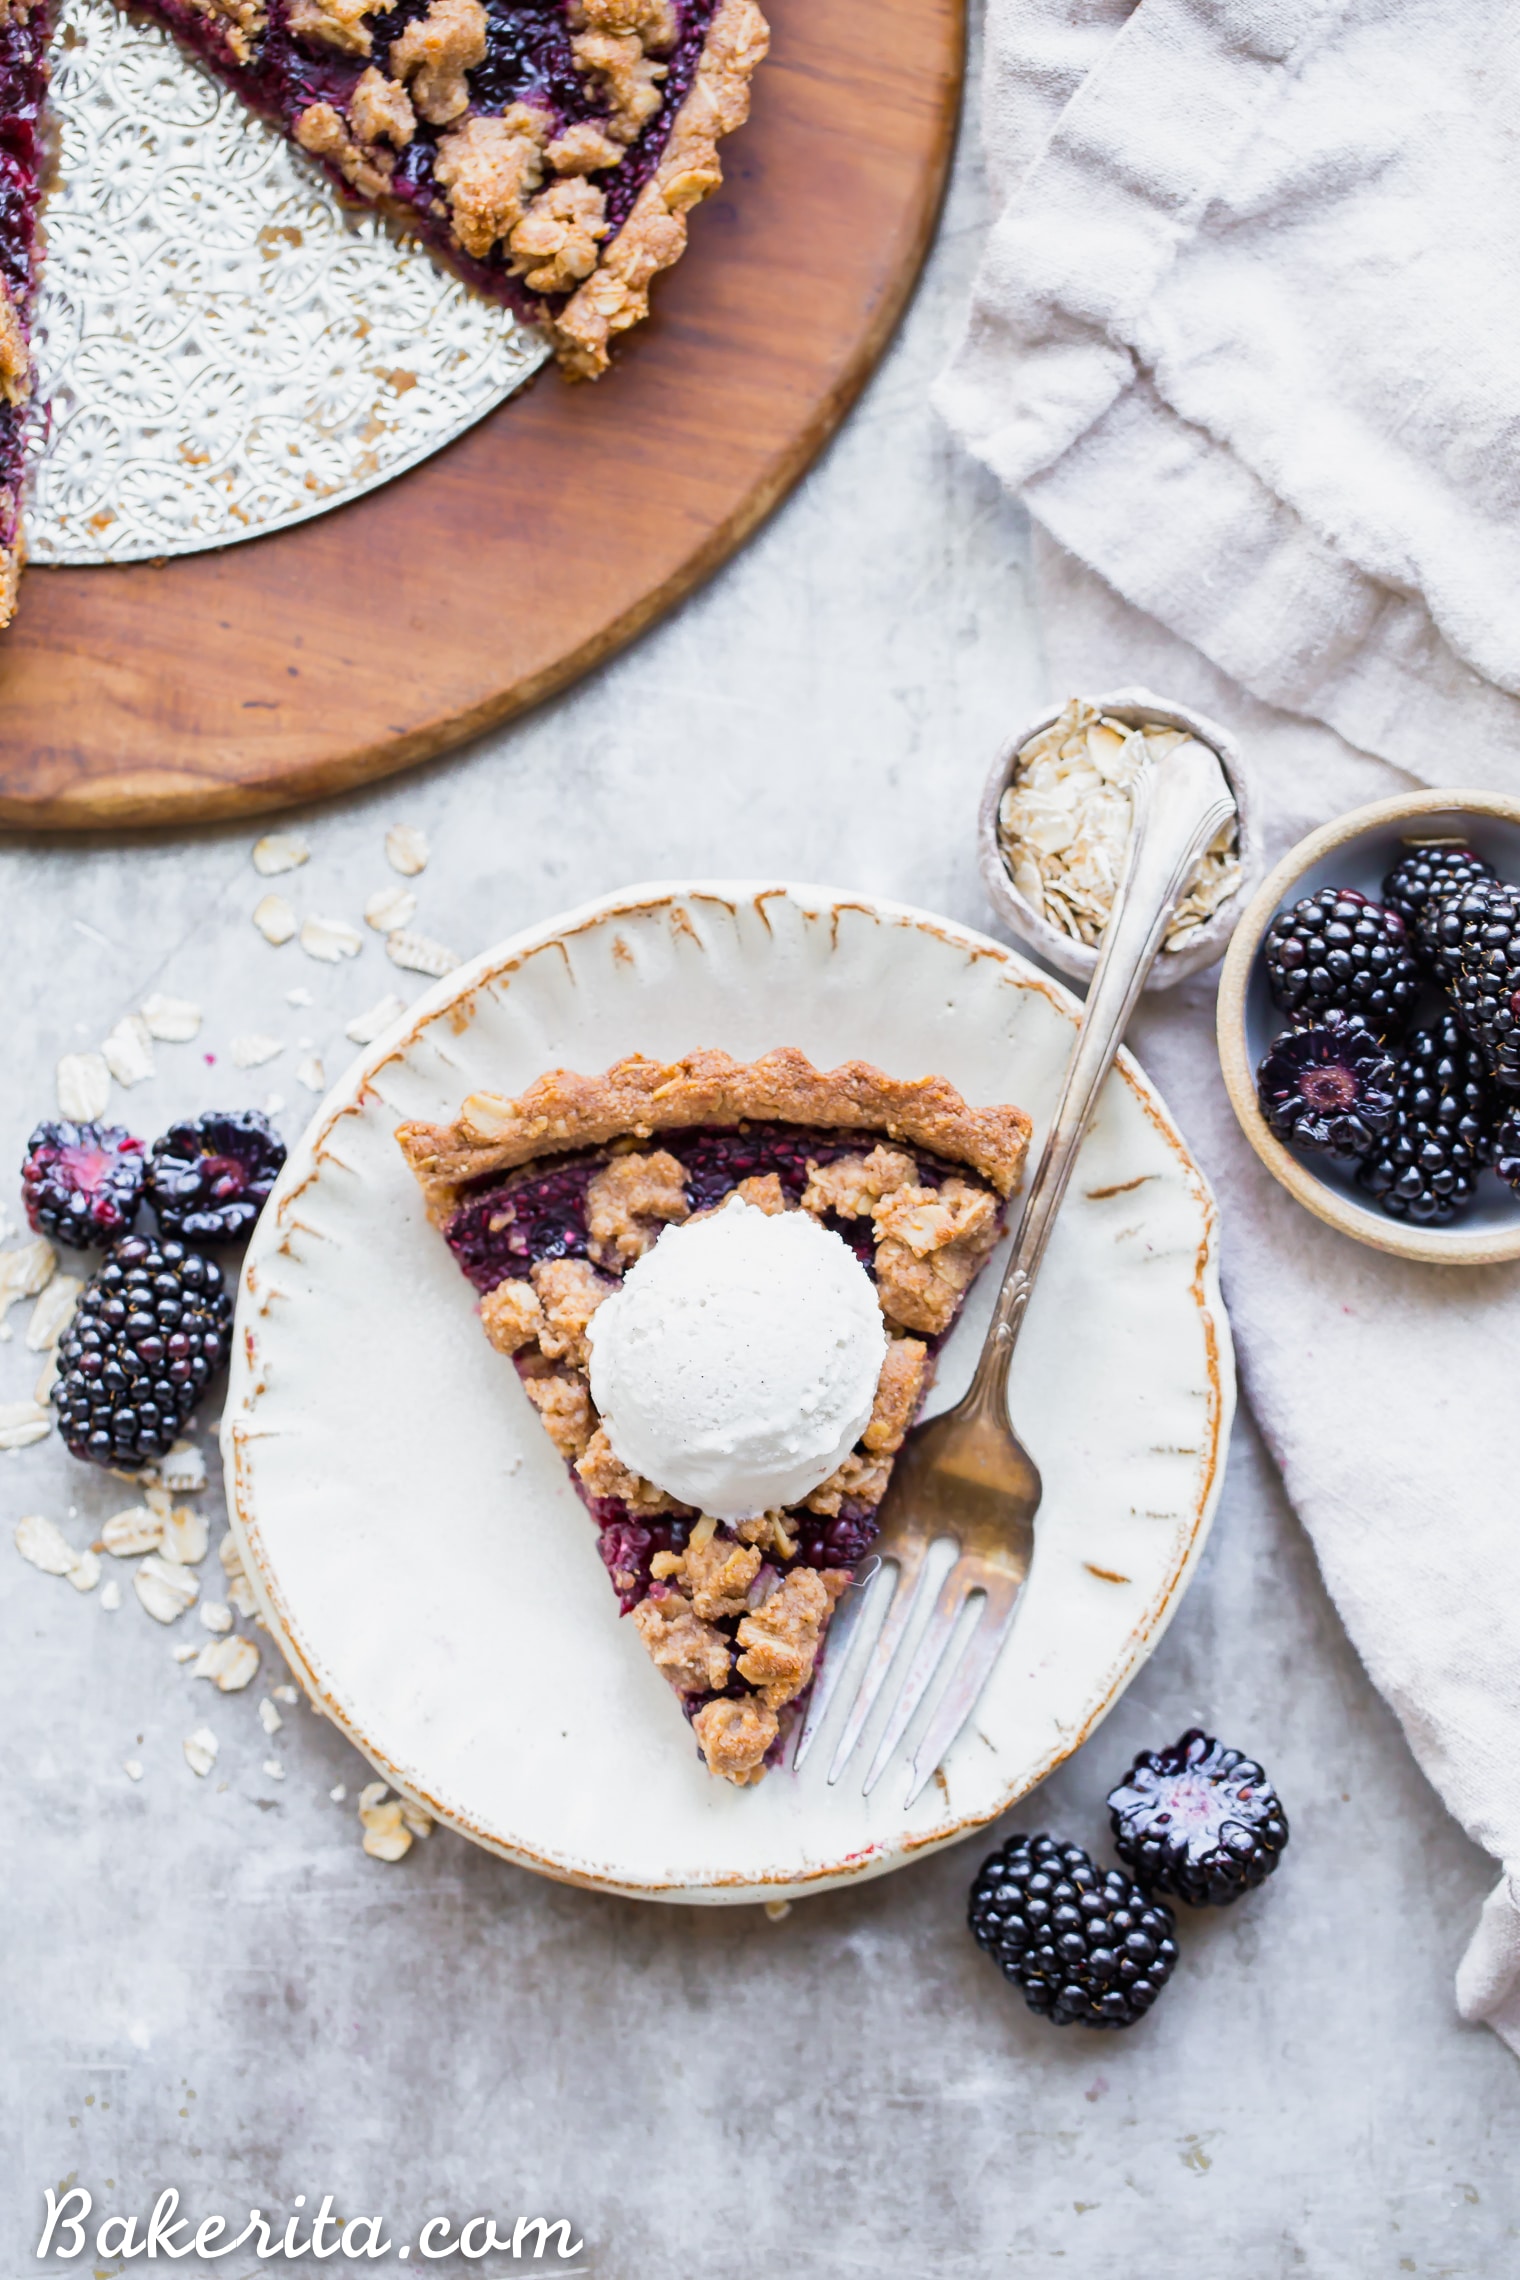 This quick and easy Blackberry Crisp Tart has an oatmeal crust, a layer of quick blackberry chia jam, and fresh blackberries! It's perfect with vanilla ice cream. This simple recipe is gluten-free, refined sugar-free and vegan.